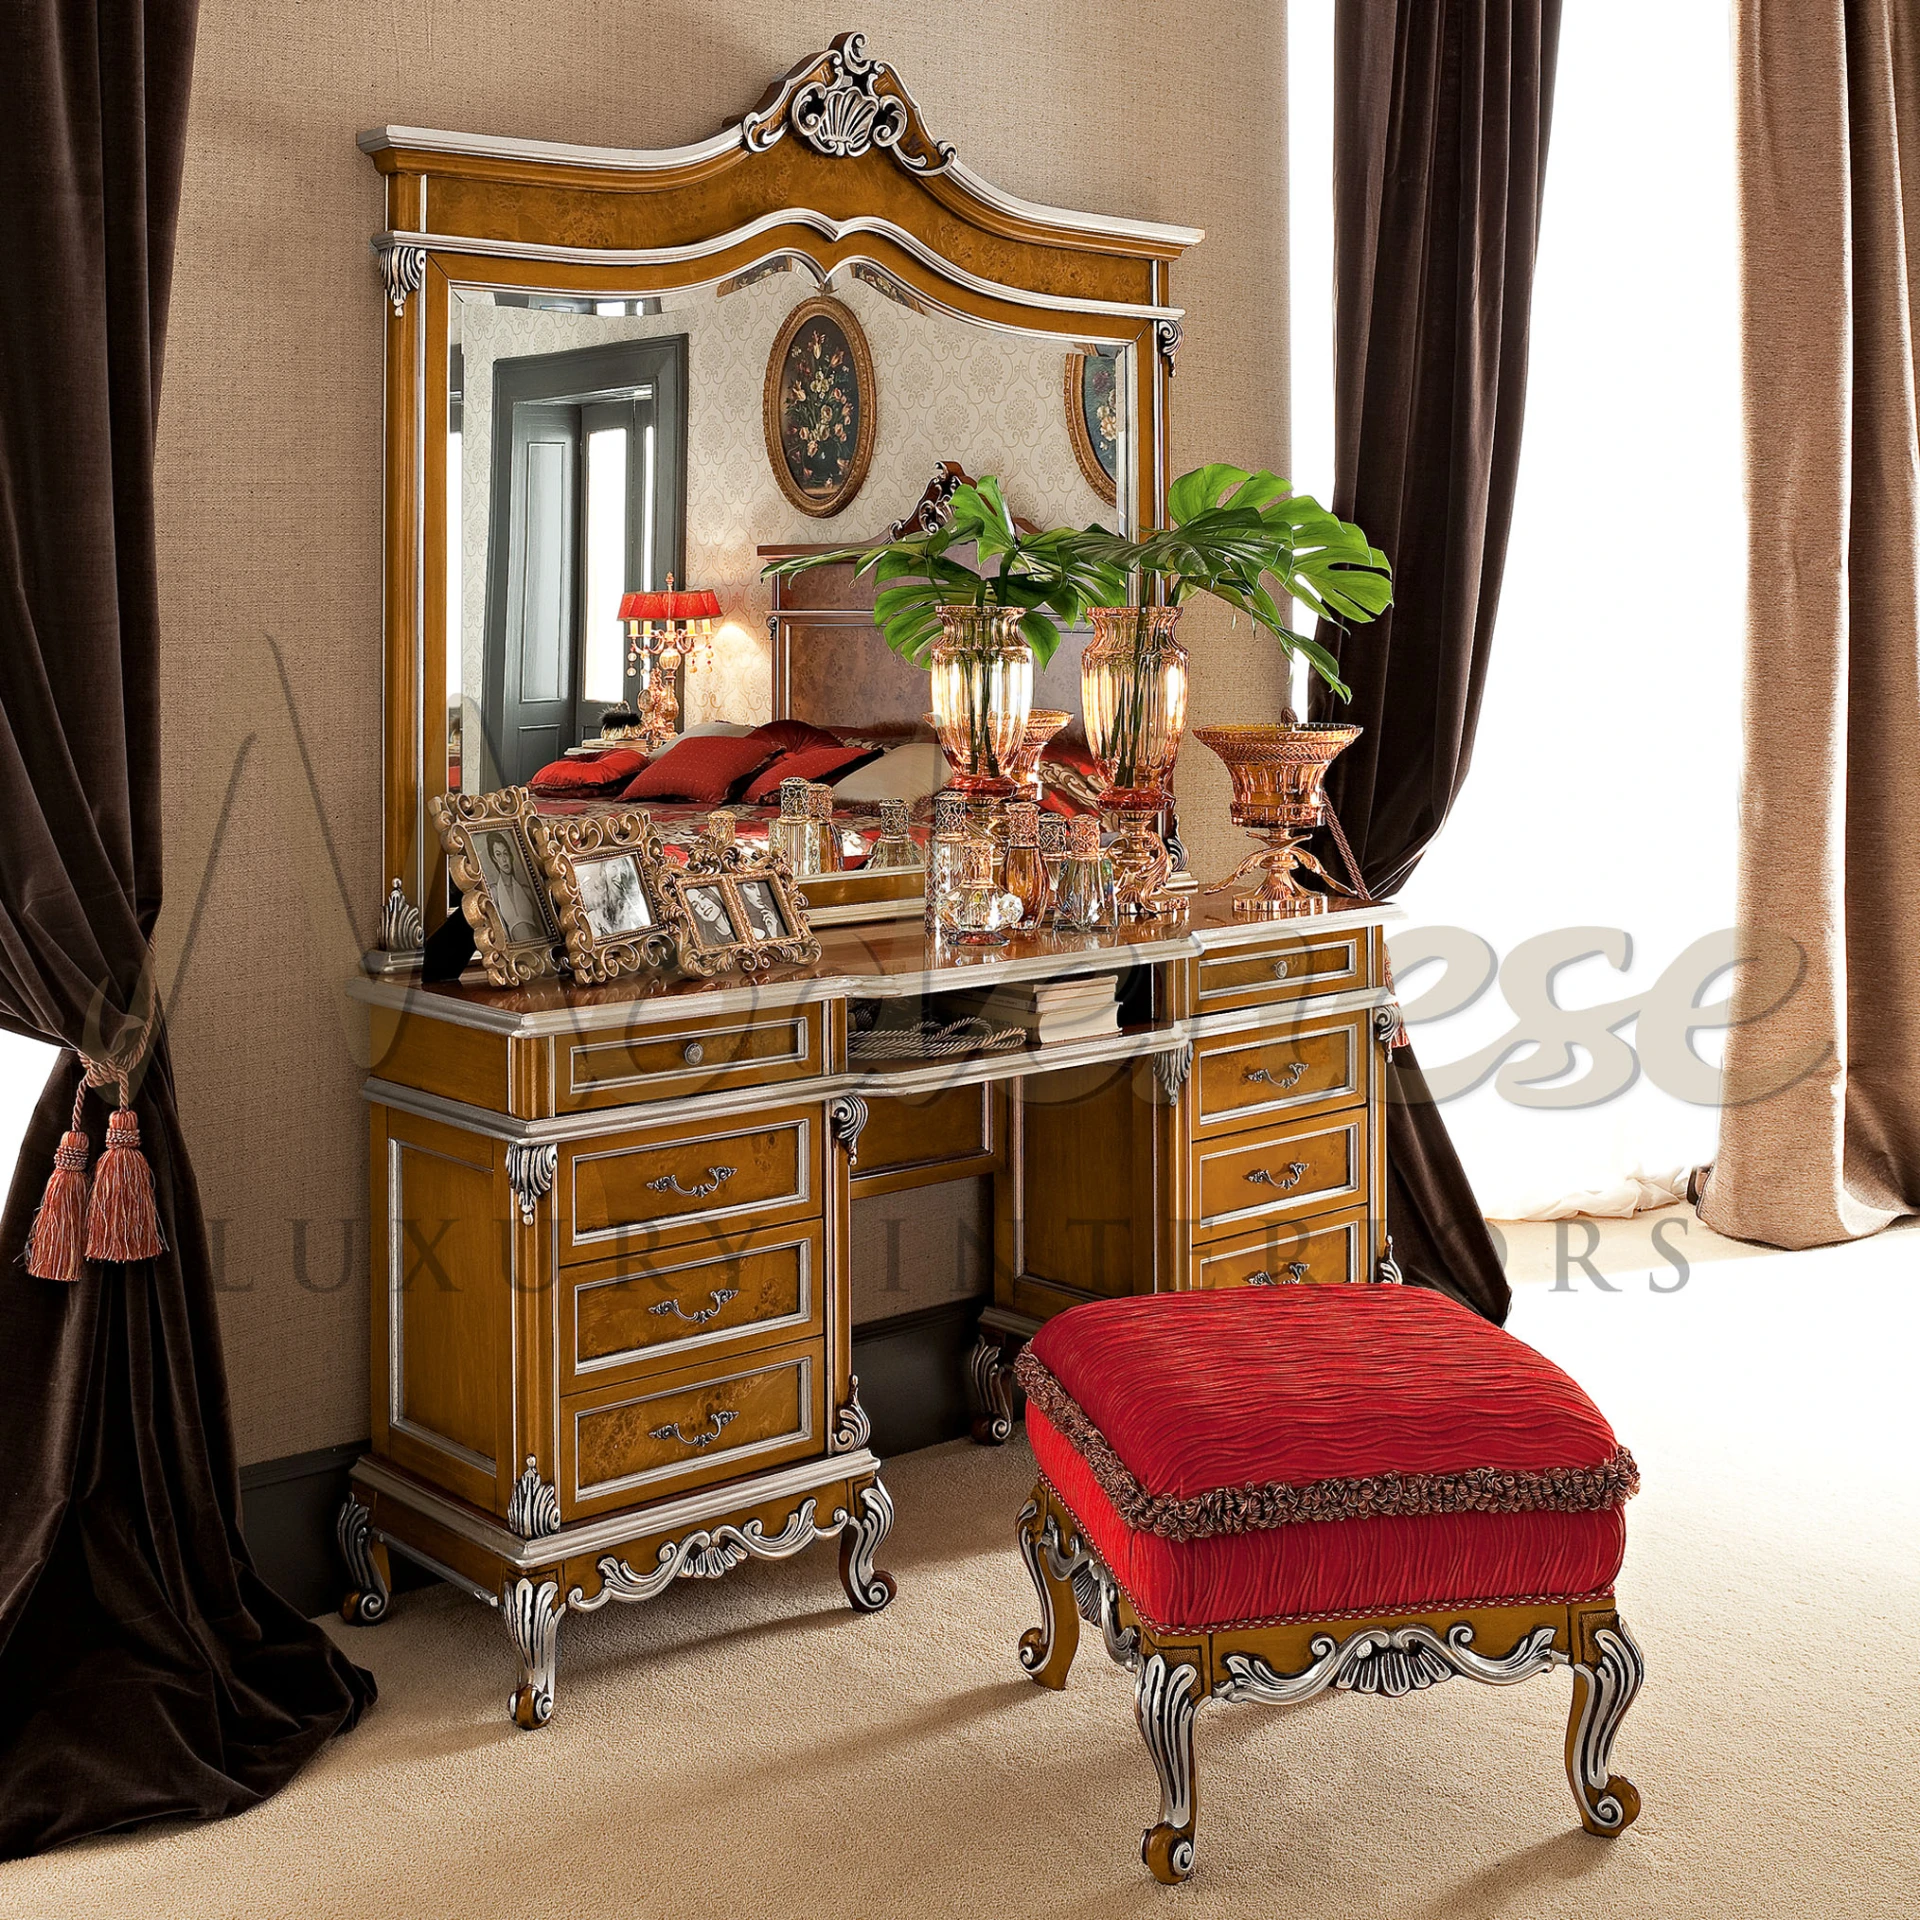 Elegant dressing table in classic wood finish with decorative handles, accompanied by a luxurious red upholstered stool and decorative tabletop items.